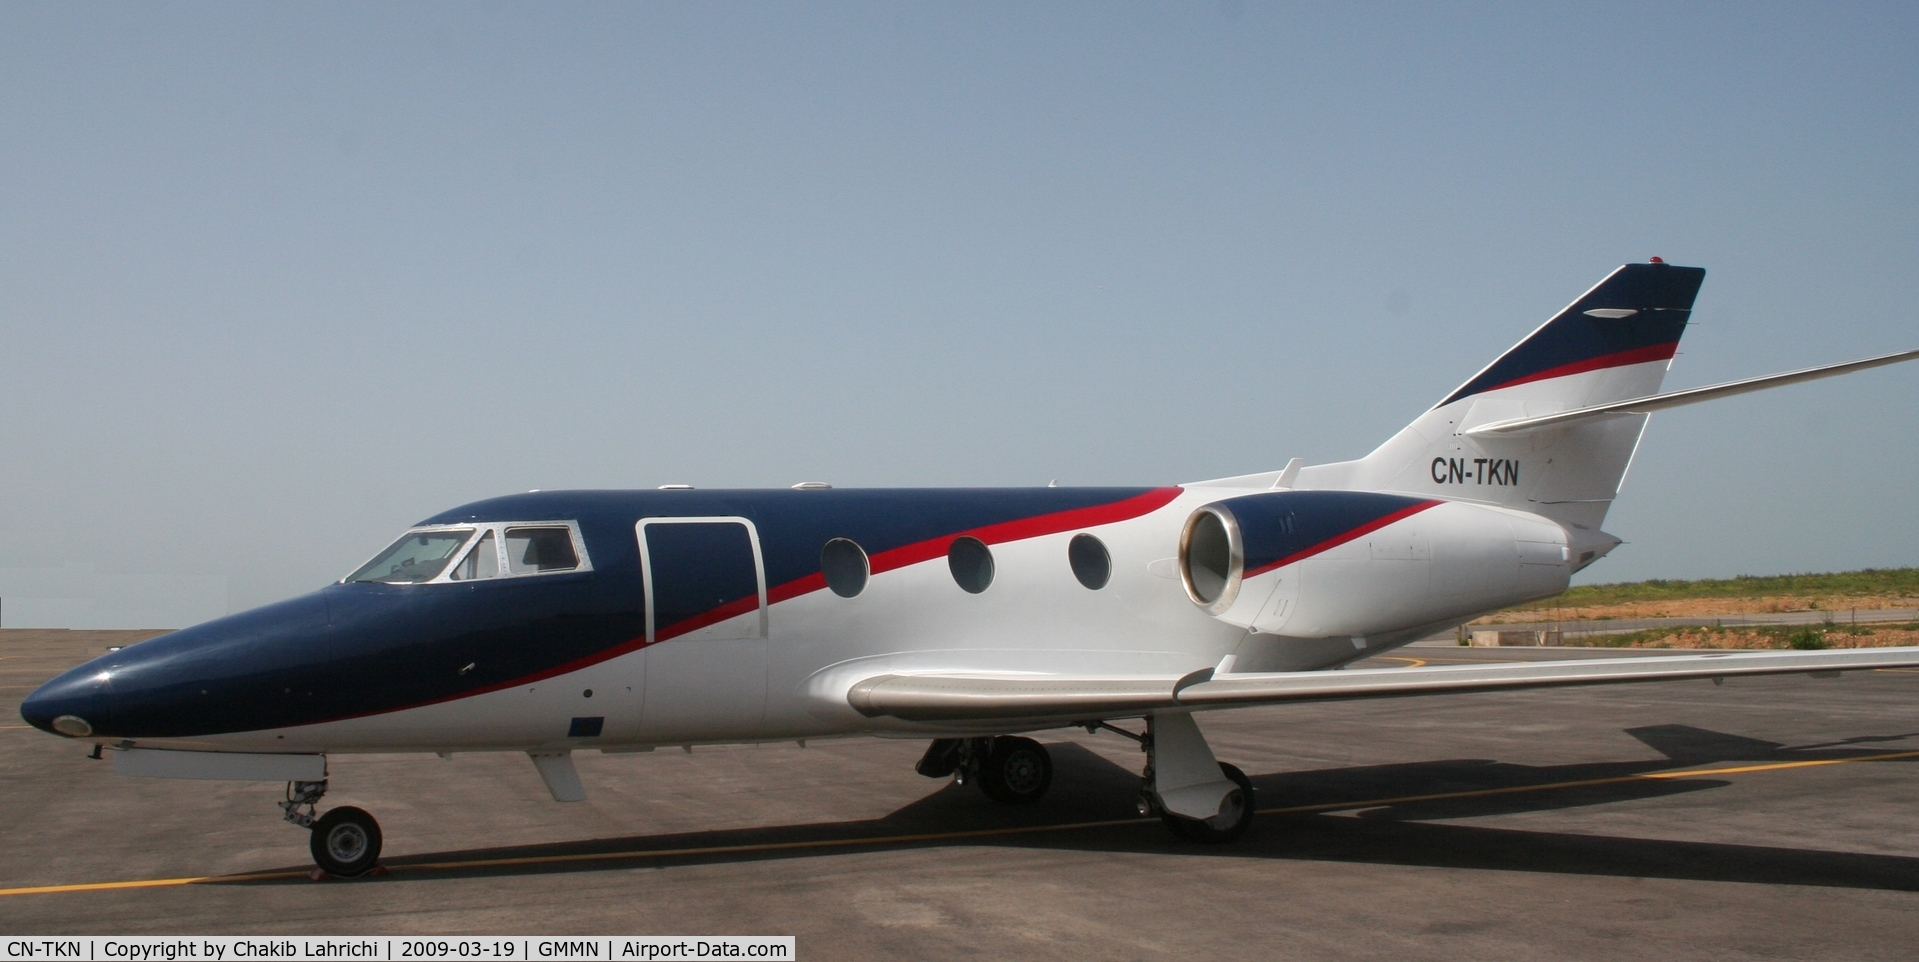 CN-TKN, 1978 Dassault Falcon 10 C/N 128, When Alfa Air has acquired the Falcon 10, has headed the painting redone